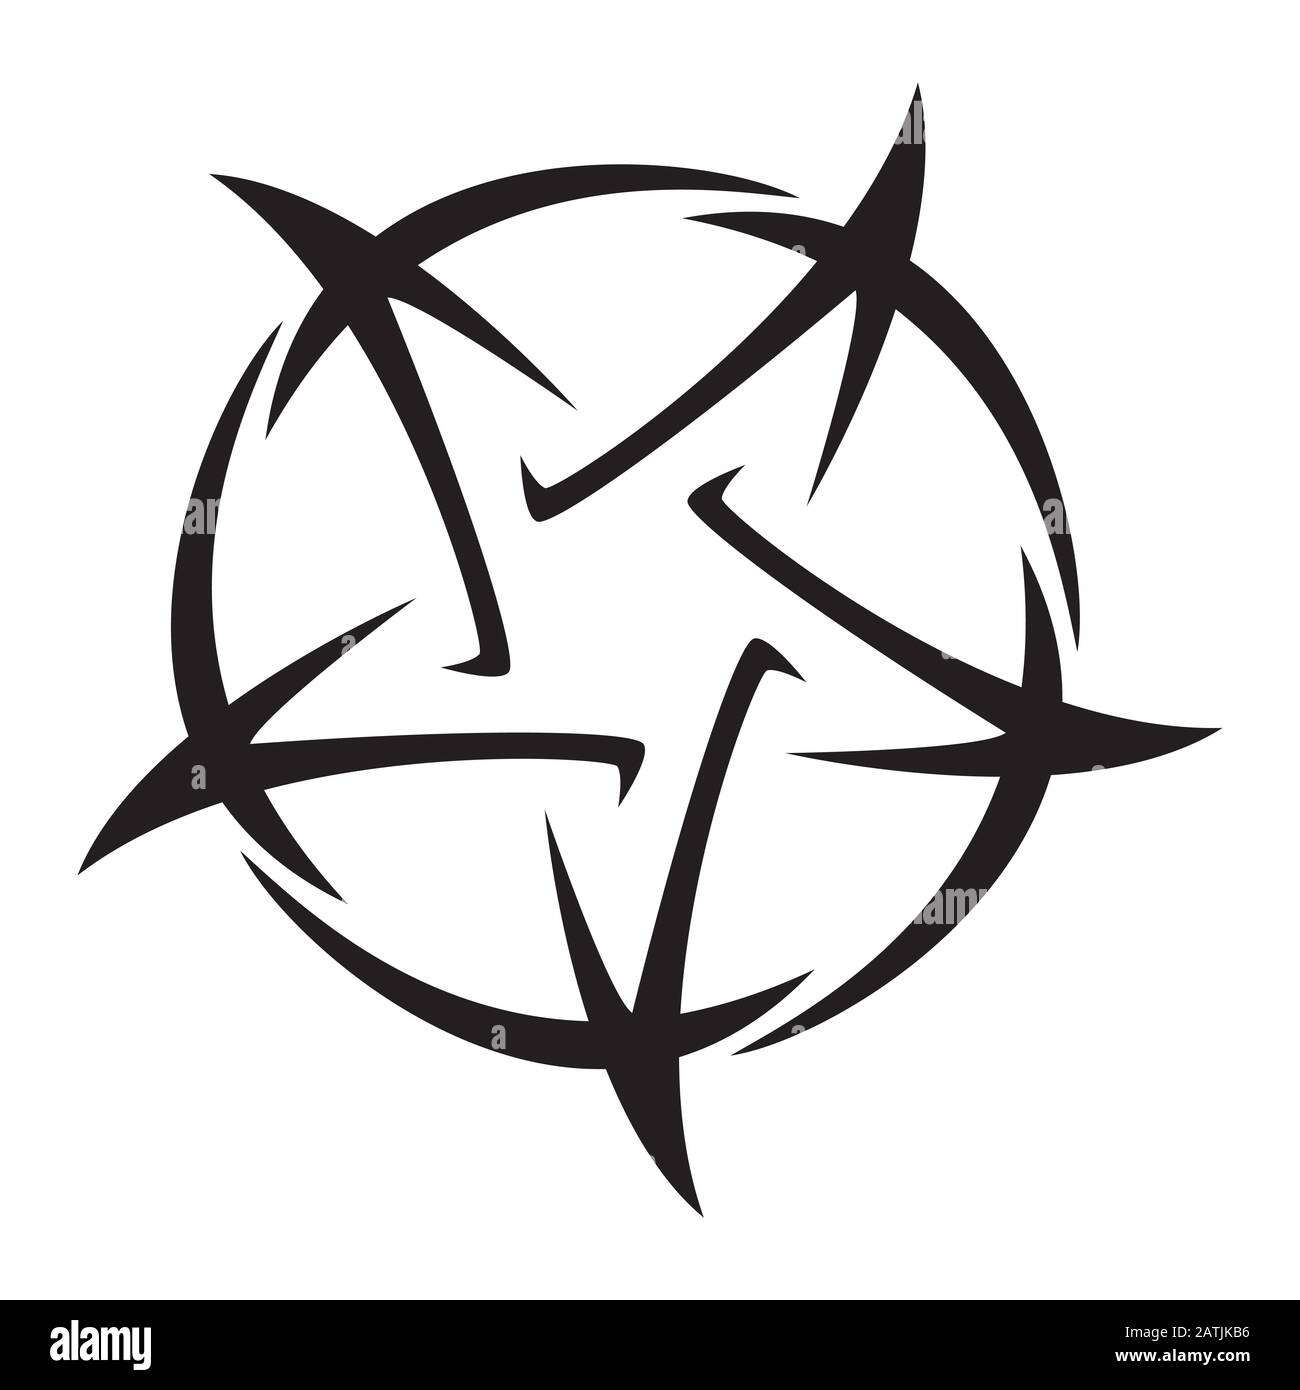 Devil Five Pointed Star Vector Images (80)